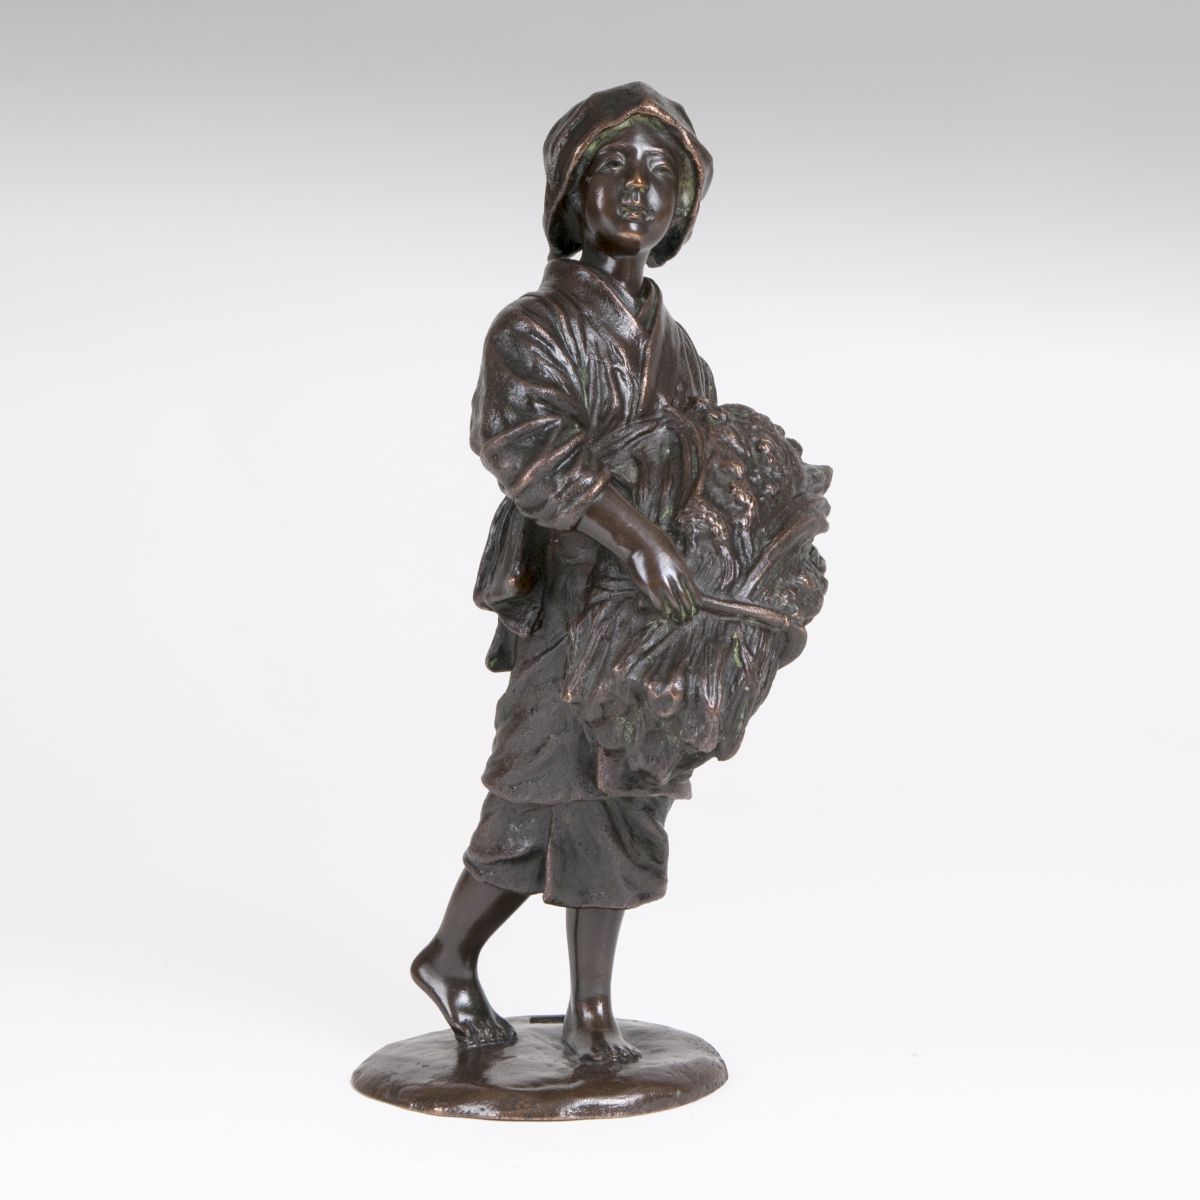 A Japanese bronze sculpture 'Peasant woman with sheaf of grain'